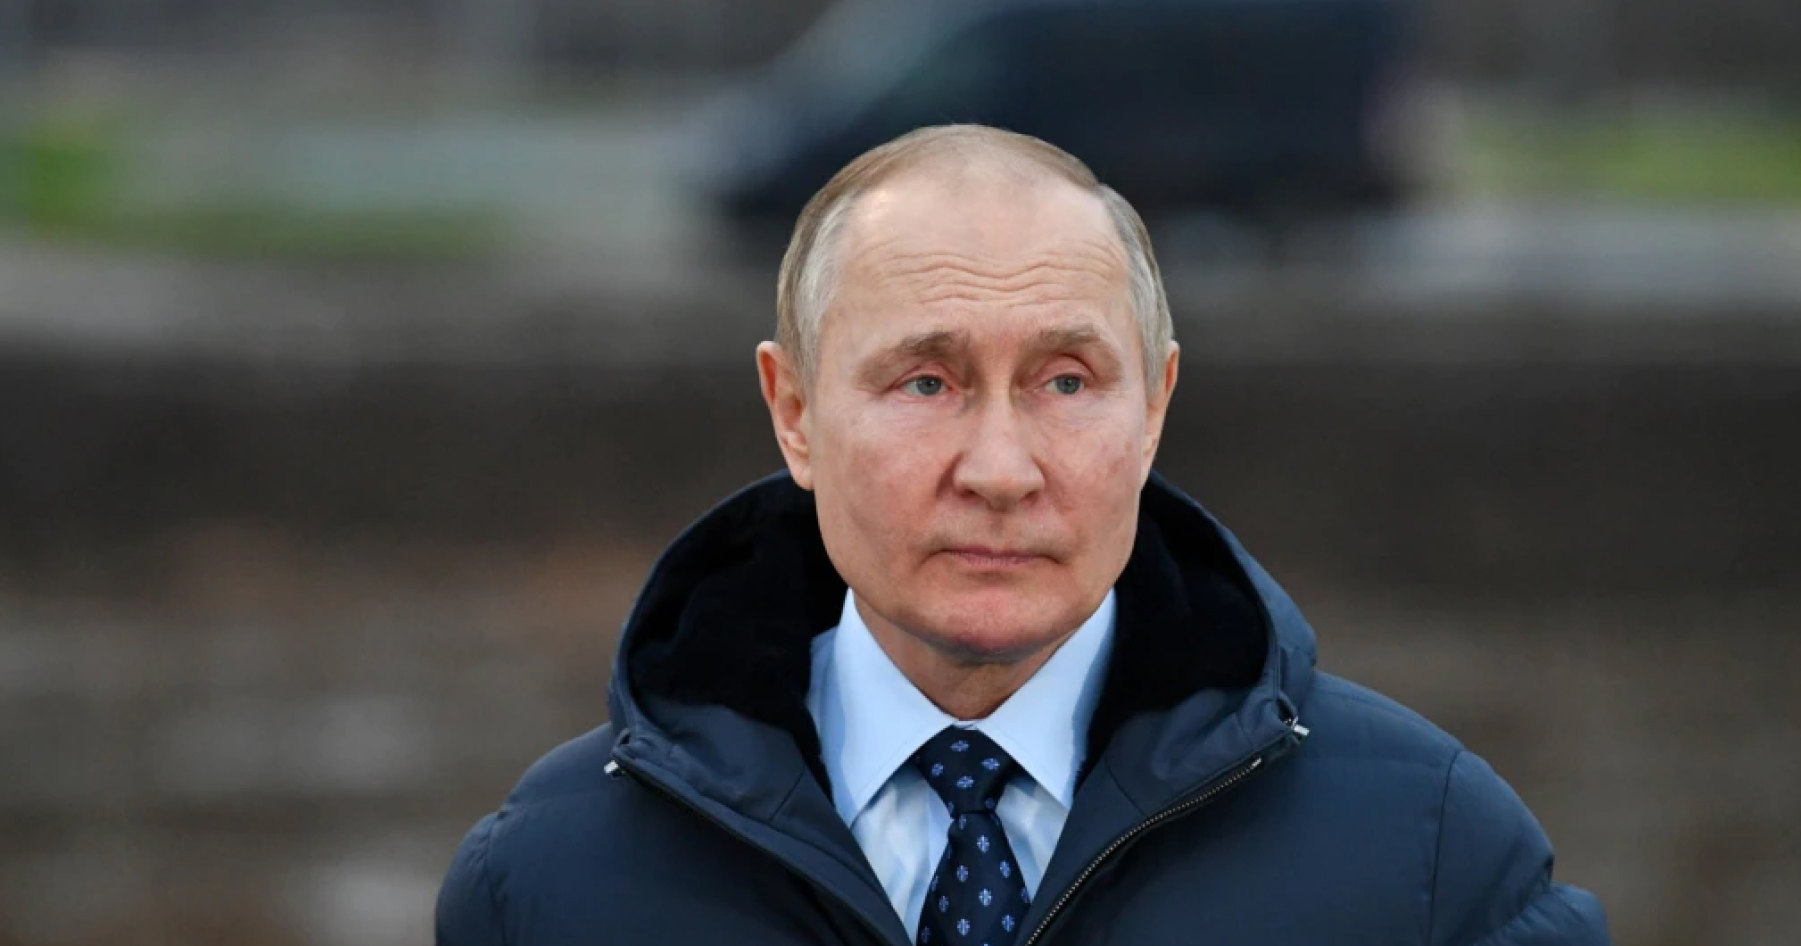 President Putin will allegedly not participate in the G20 summit